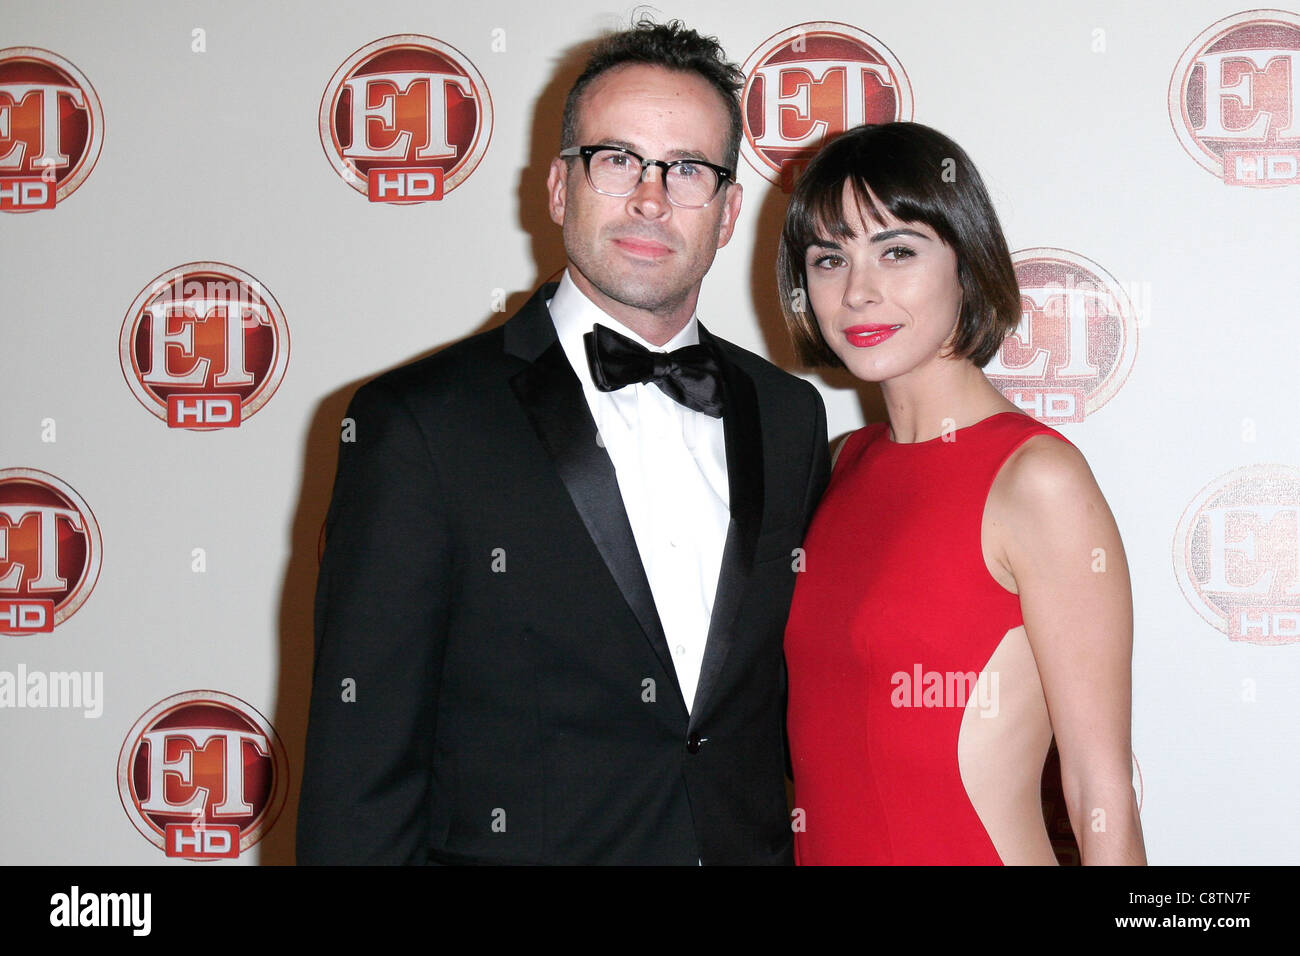 Jason Lee, Ceren Alkac at arrivals for Entertainment Tonight 15th Annual Emmy Party, Vibiana, Los Angeles, CA September 18, Stock Photo